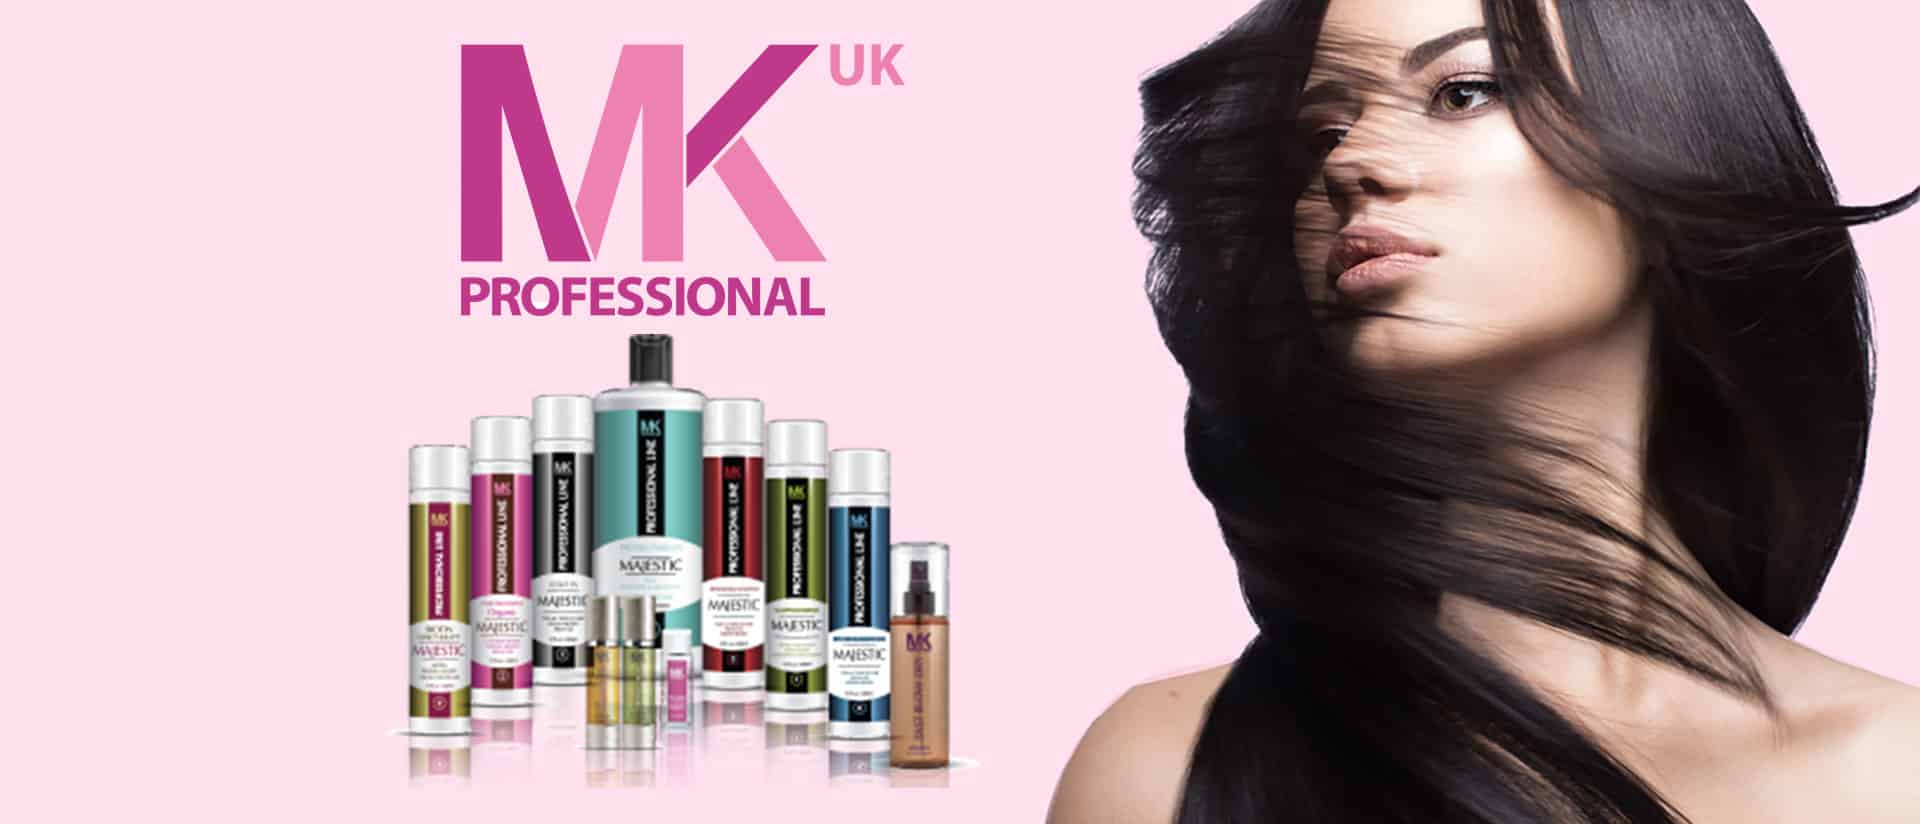 MK PROFESSIONAL MAJESTIC HAIR SERUM WITH SUNFLOWER AND SESAME SEEDS 50 ML4